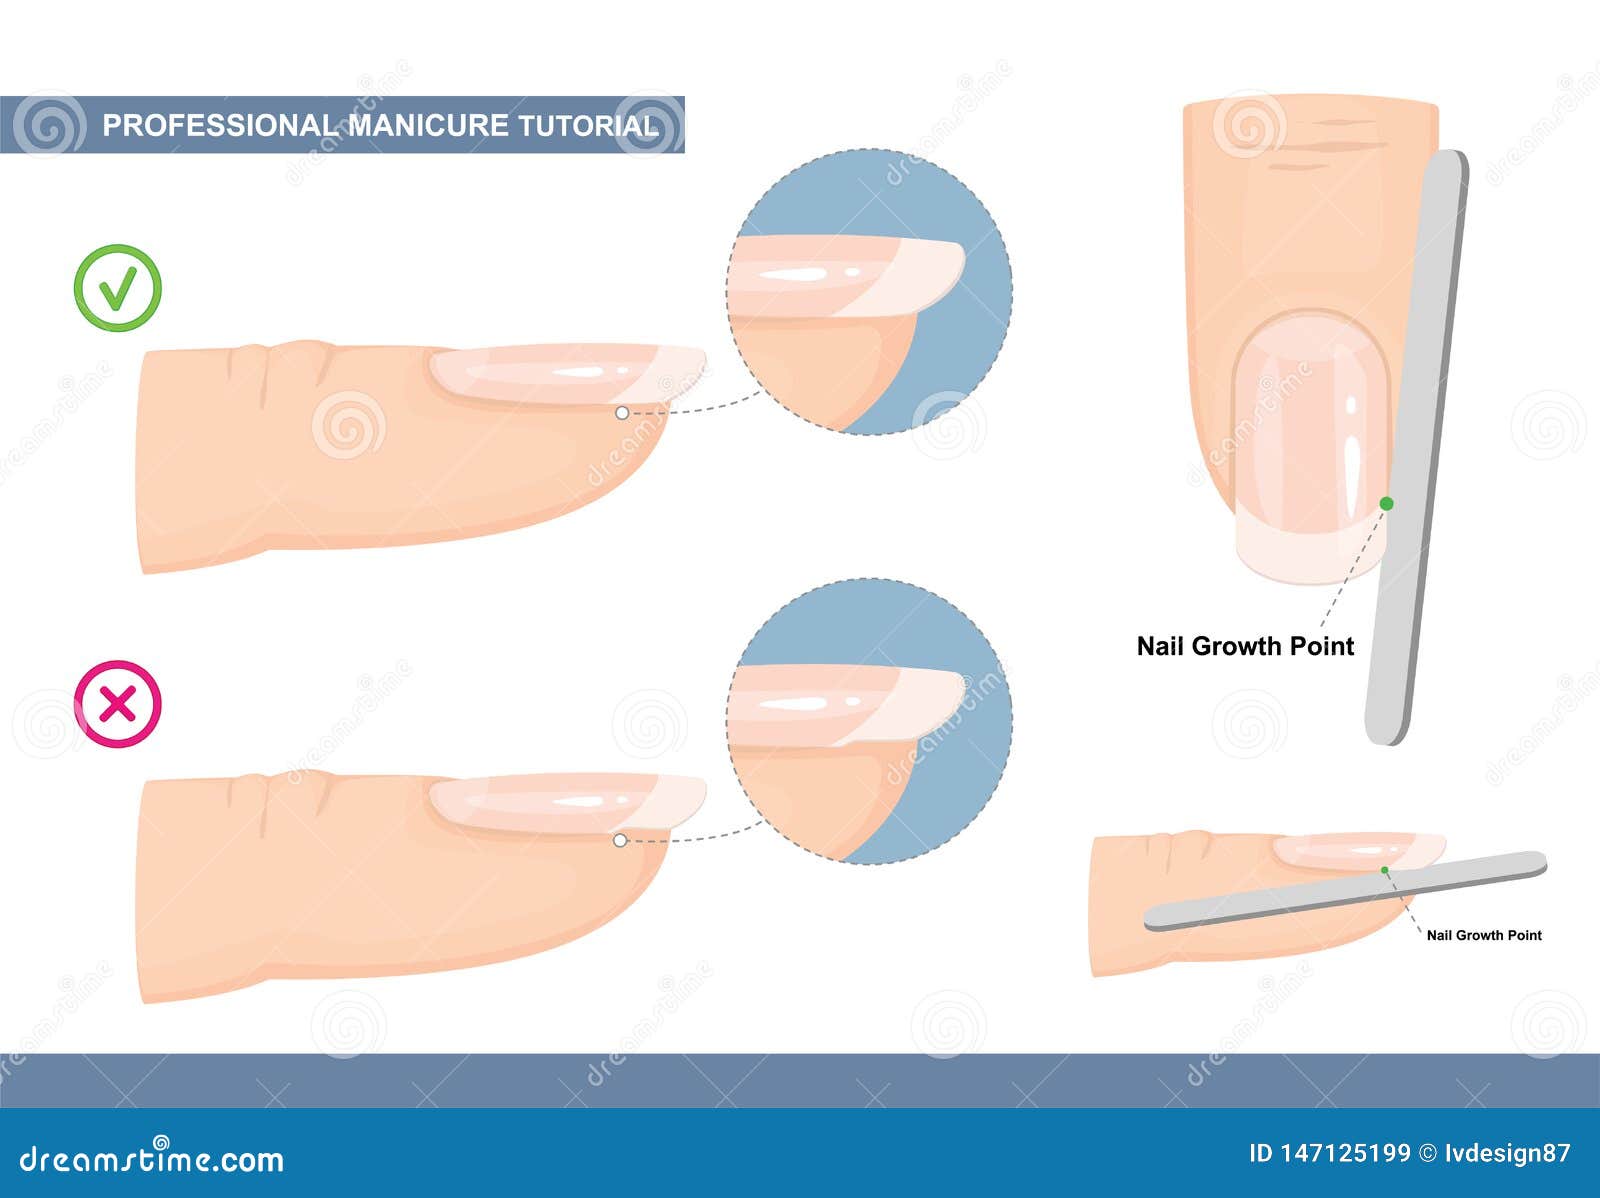 professional manicure tutorial. the perfect nail . how to file nails the right way. manicure mistakes. 